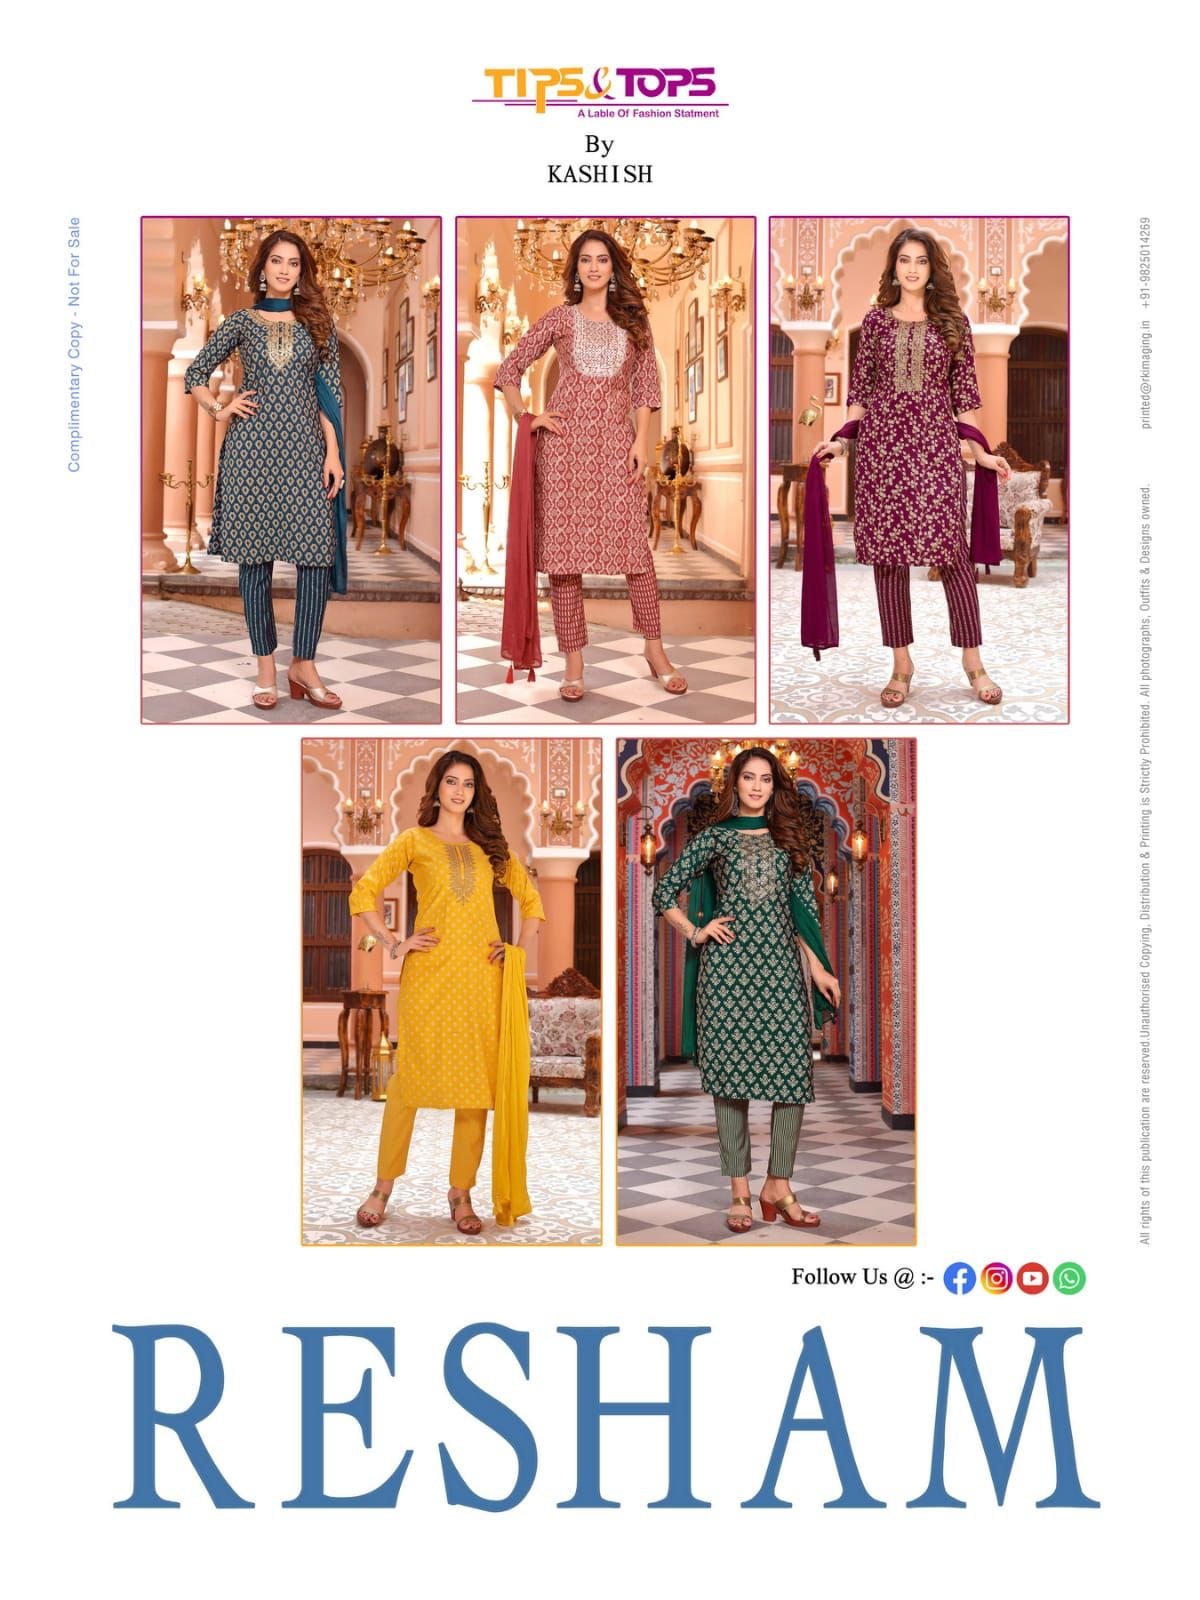 Tips And Tops Resham collection 1